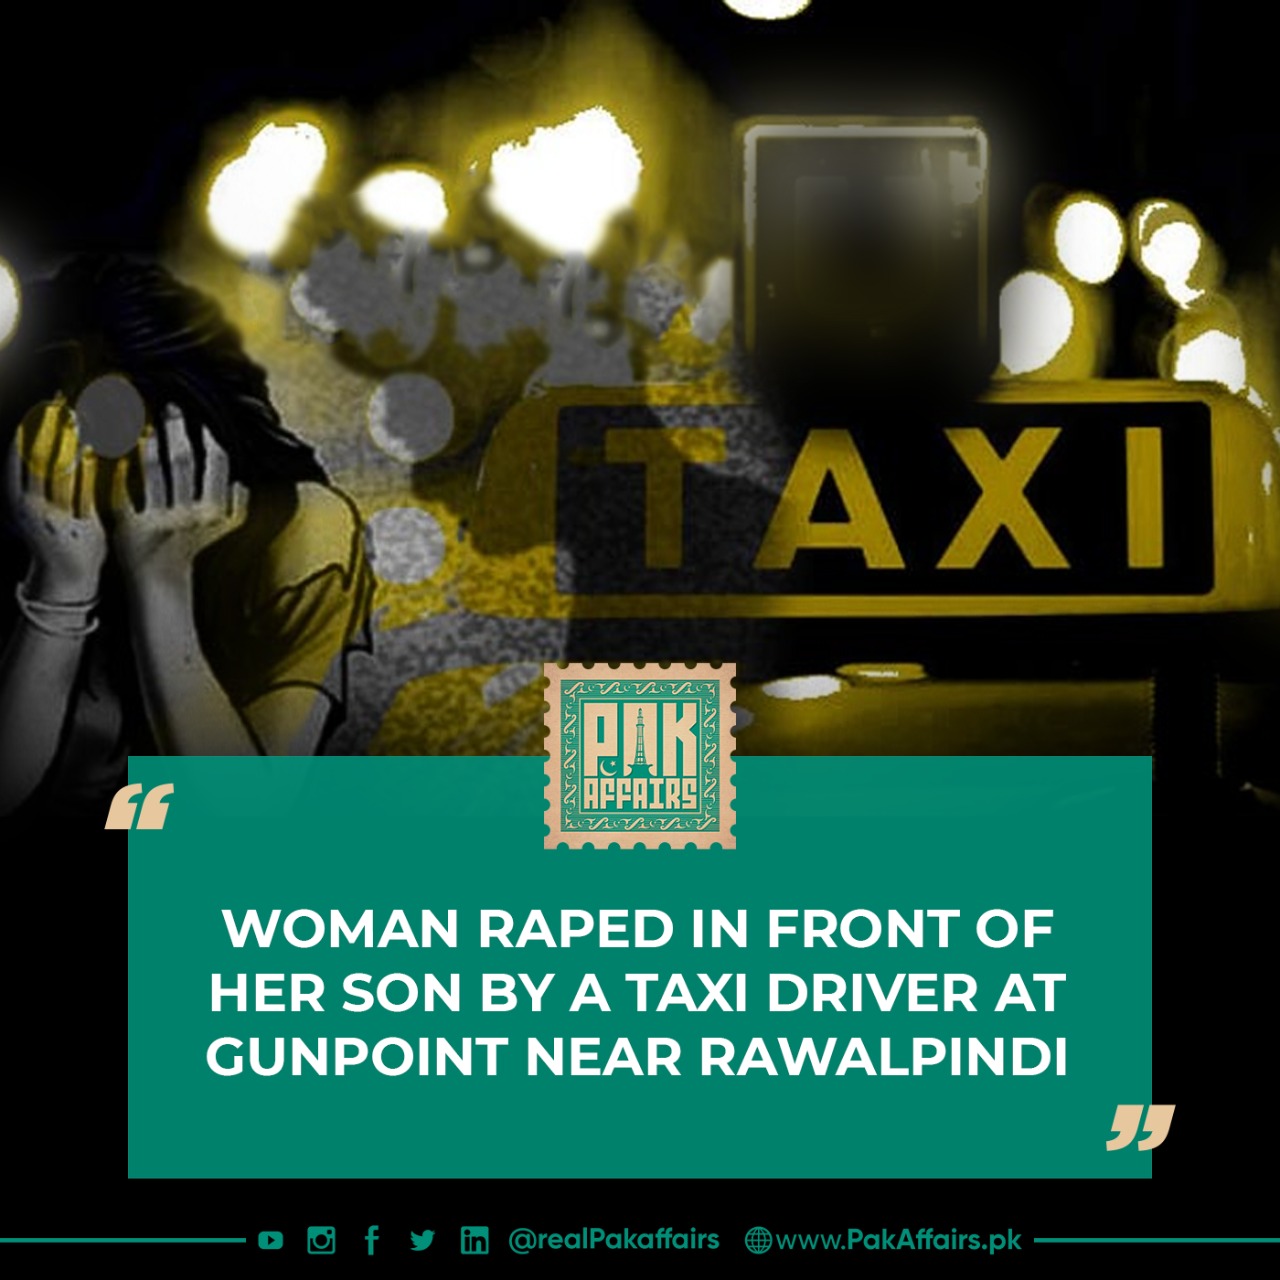 Woman raped in front of her son by a taxi driver at gunpoint near Rawalpindi